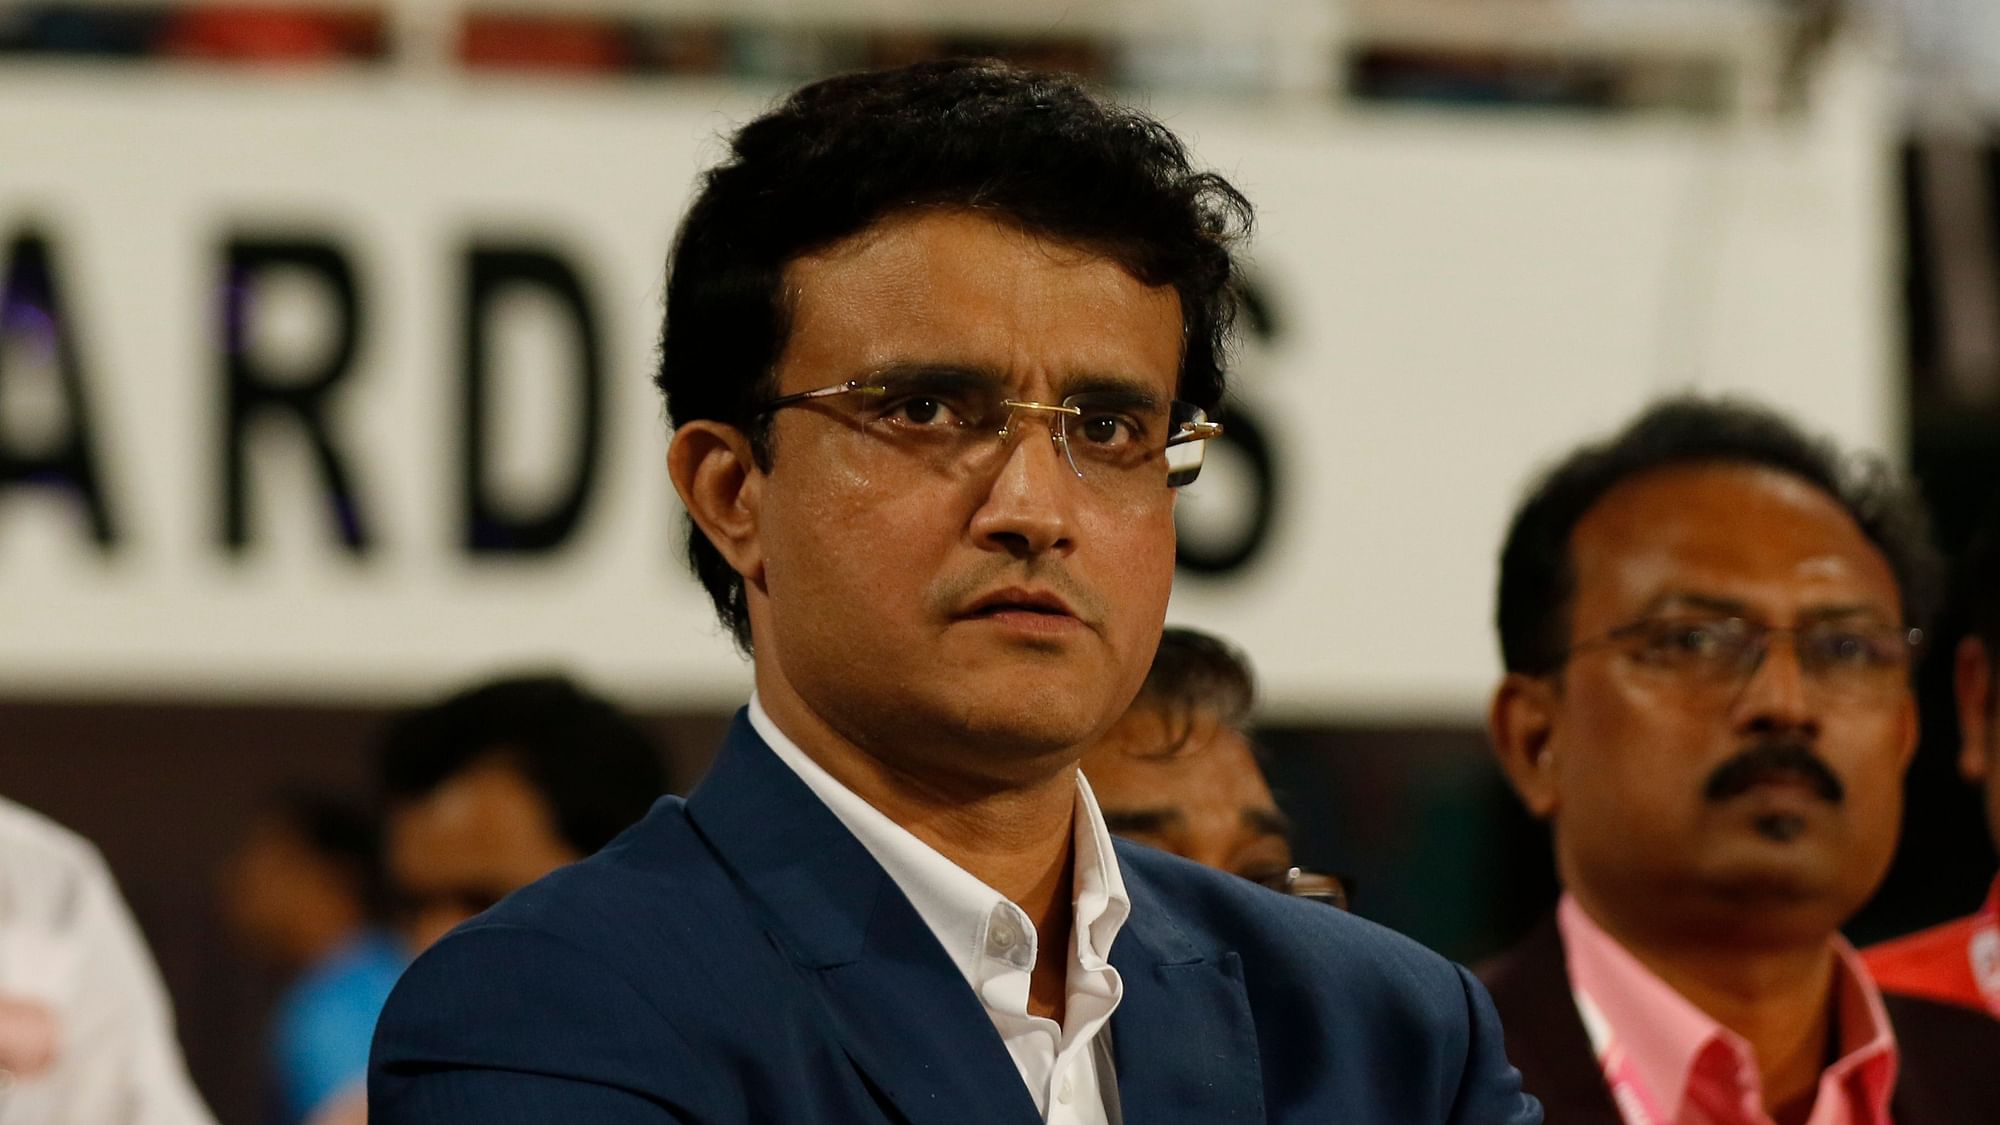 Sourav Ganguly says Ravindra Jadeja’s improved batting will be very important for the Indian team going into the future after the all-rounder played a crucial cameo in the third ODI against the West Indies in Cuttack.